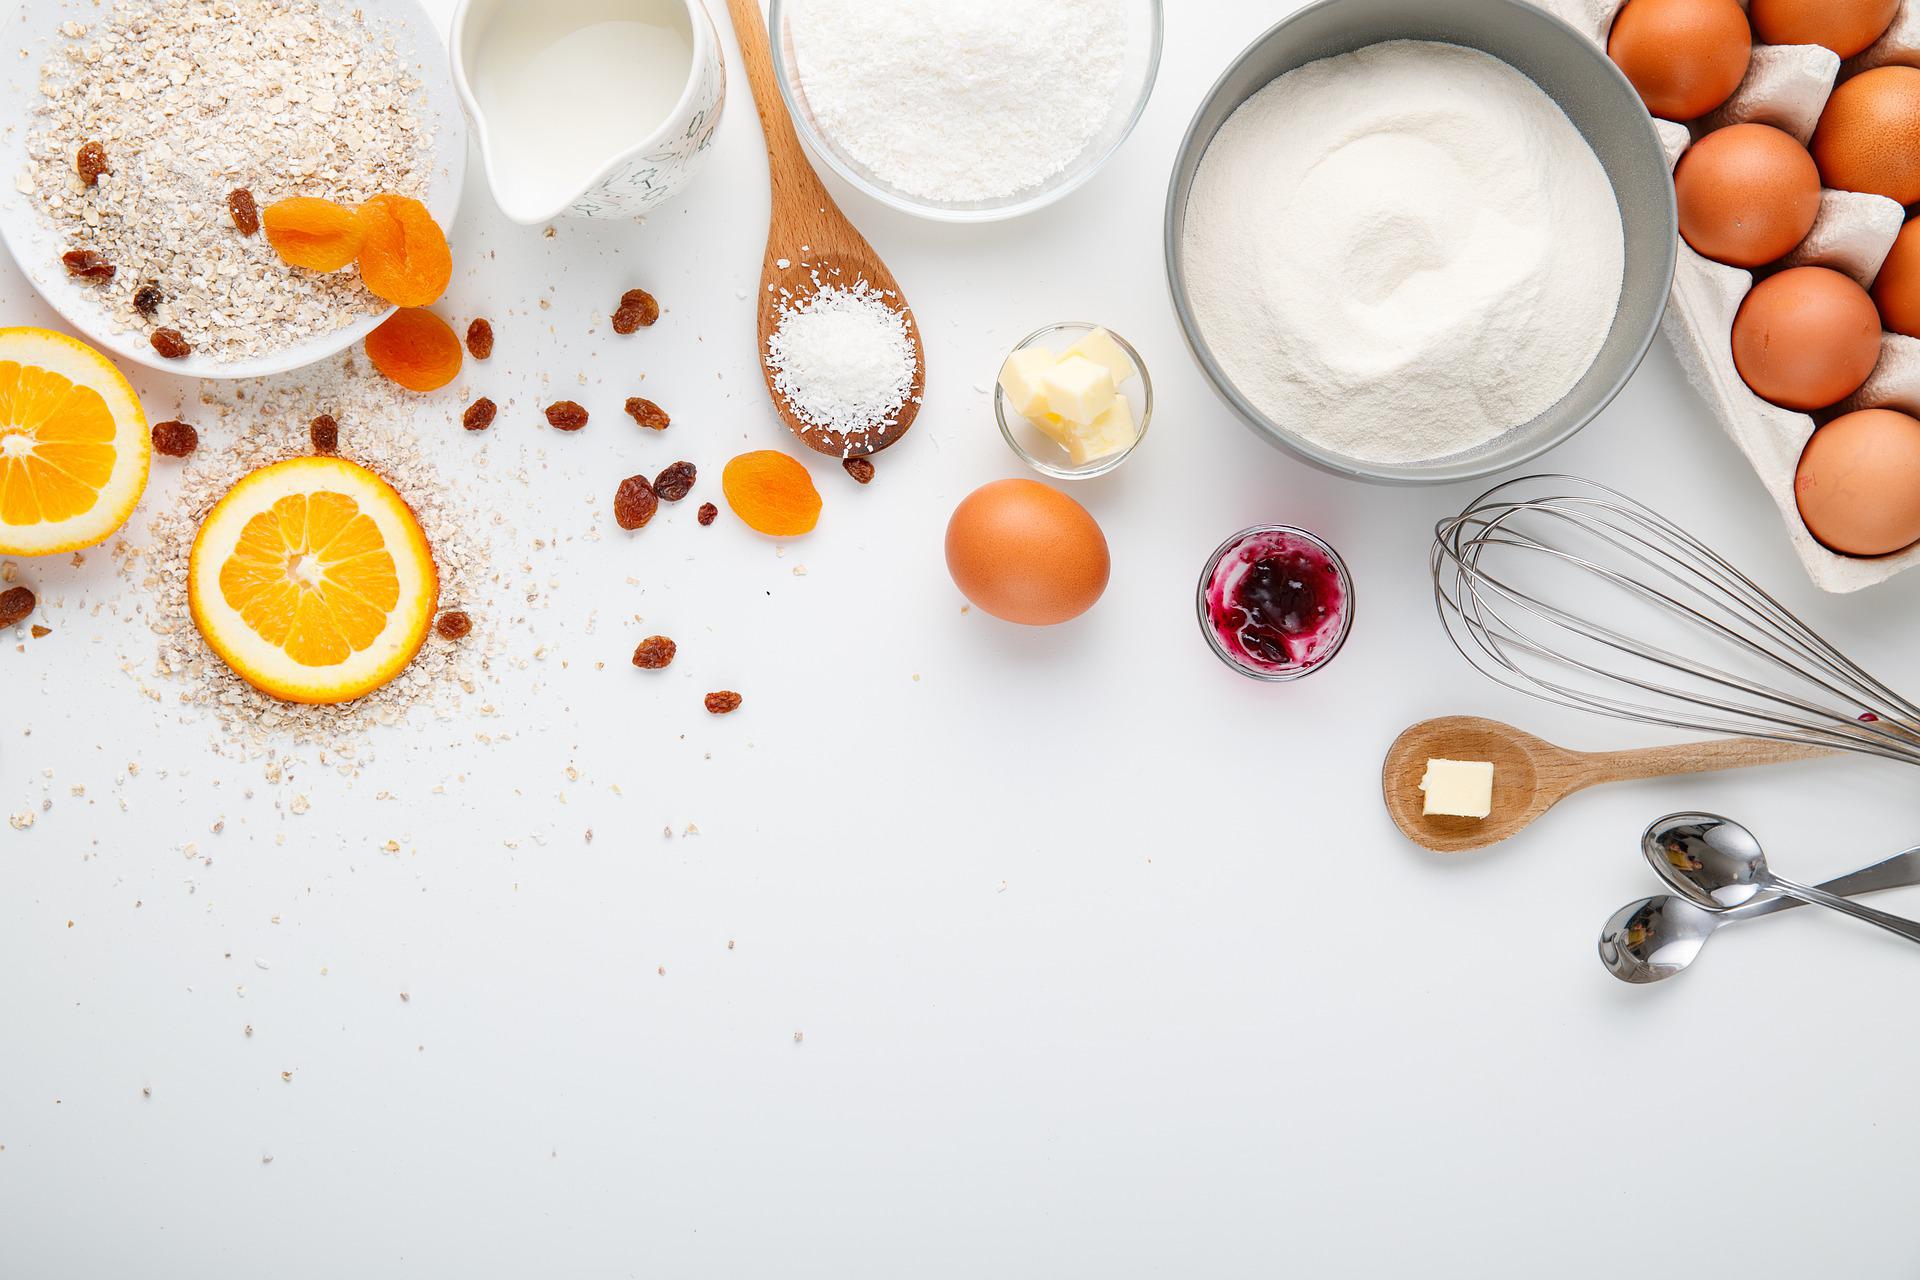 Cooking ingredients including sugar, flour, spices, and eggs laid out on a counter